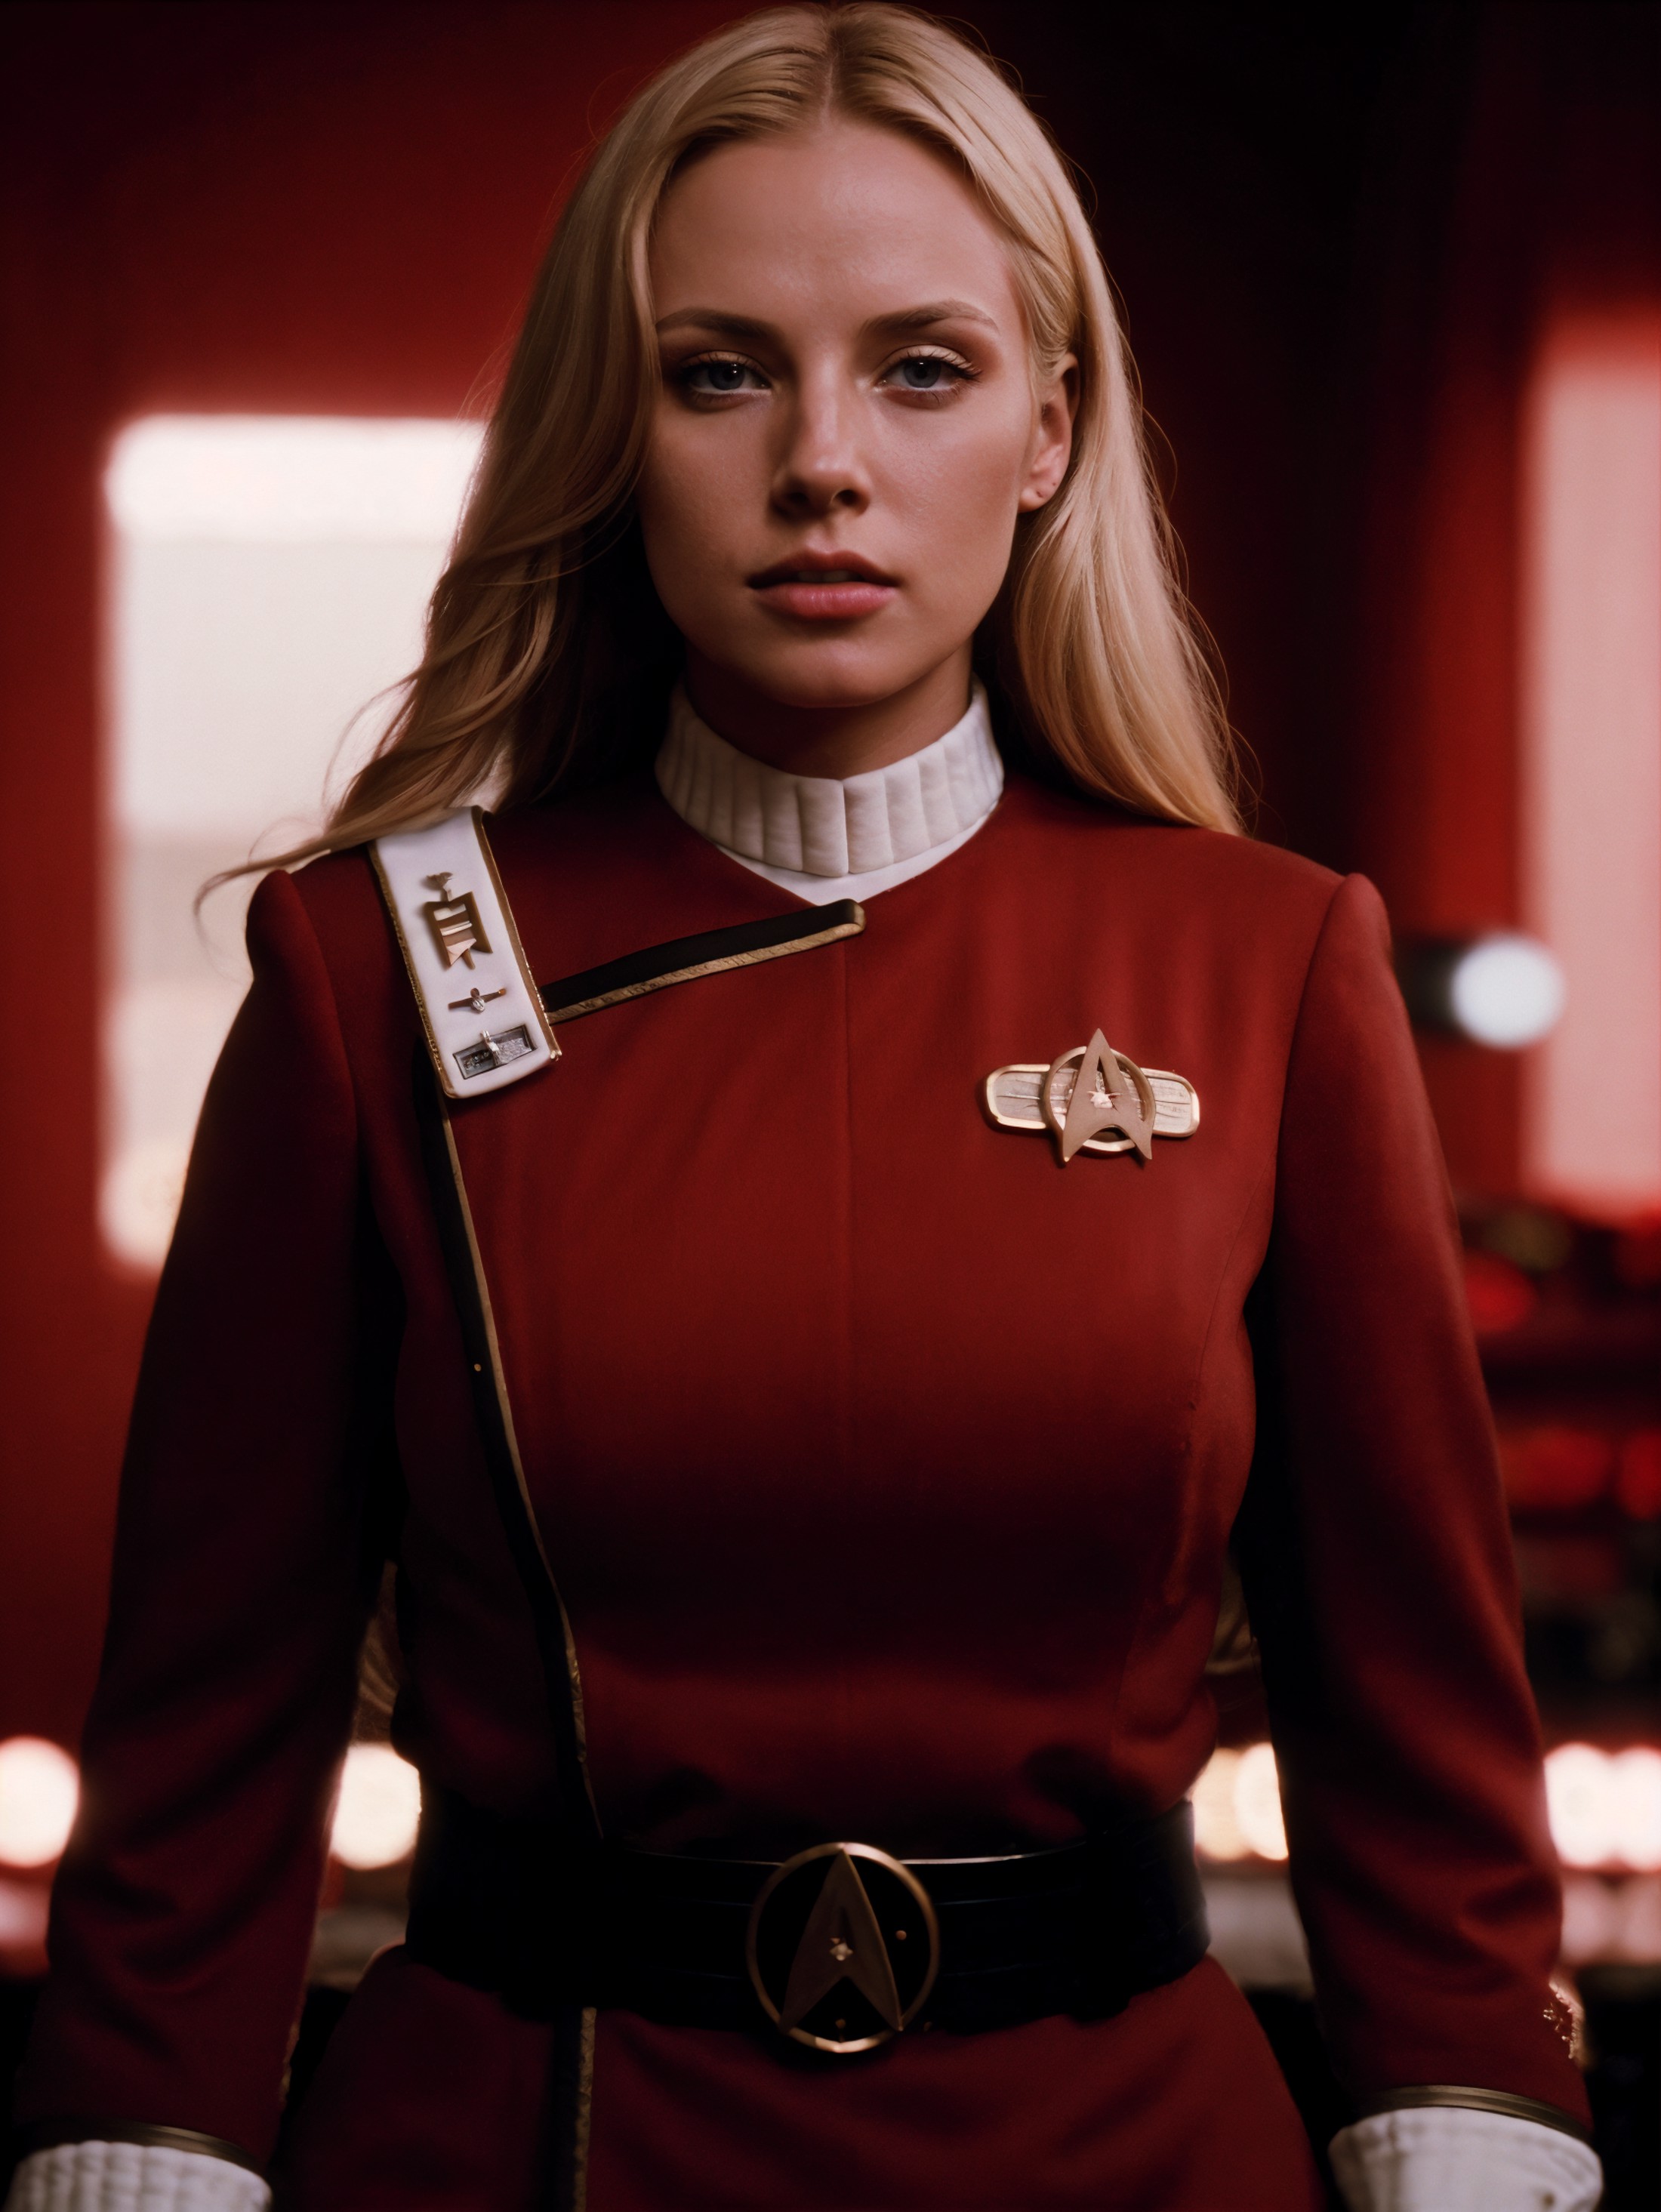 beautiful blond woman in twokunf red uniform,professional photograph of a stunning woman detailed, sharp focus, dramatic, ...